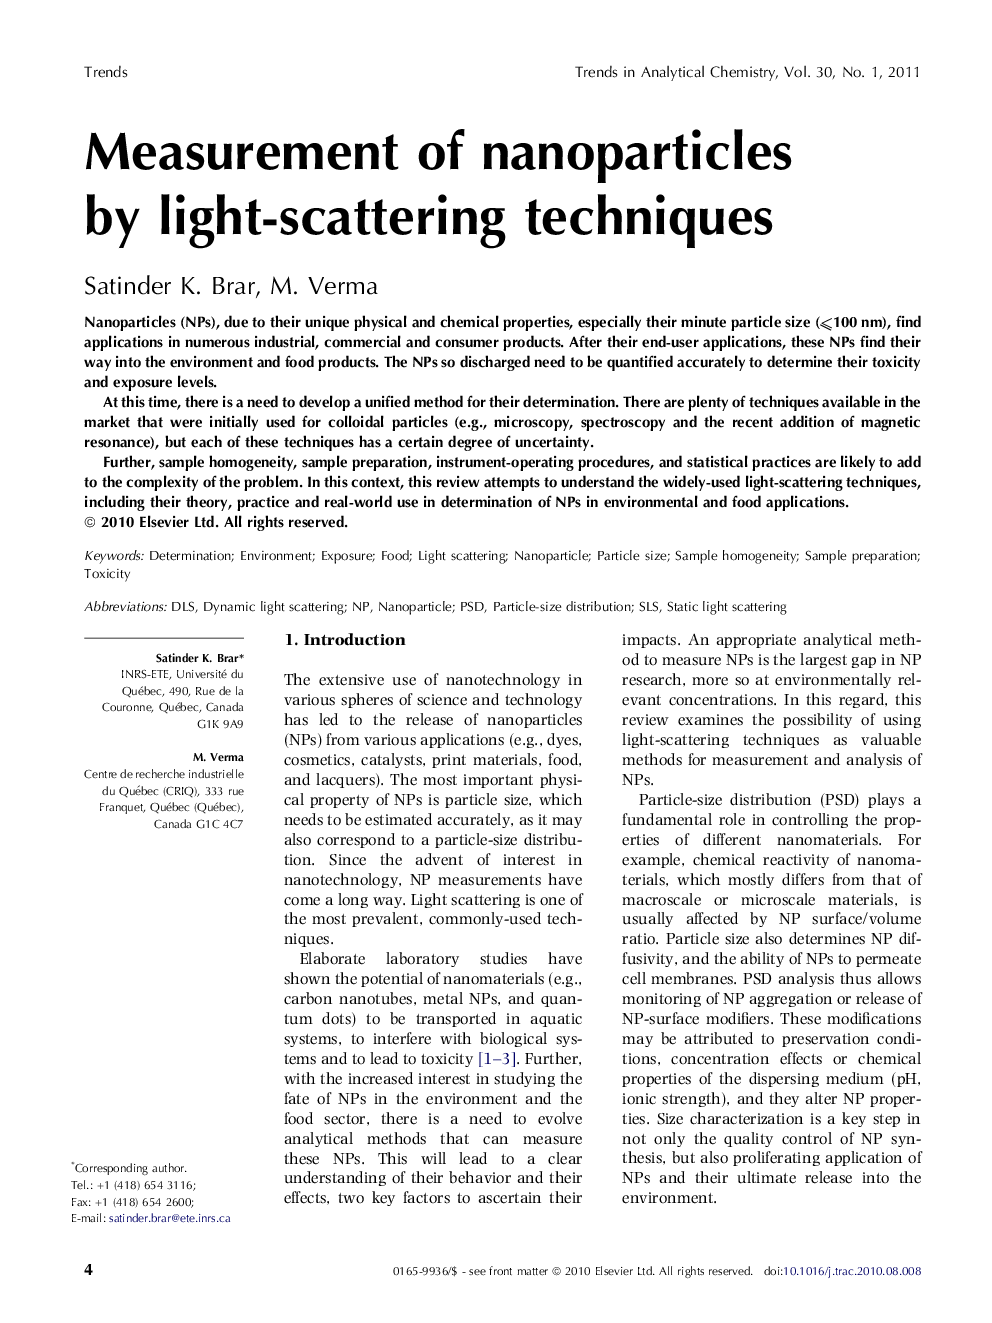 Measurement of nanoparticles by light-scattering techniques